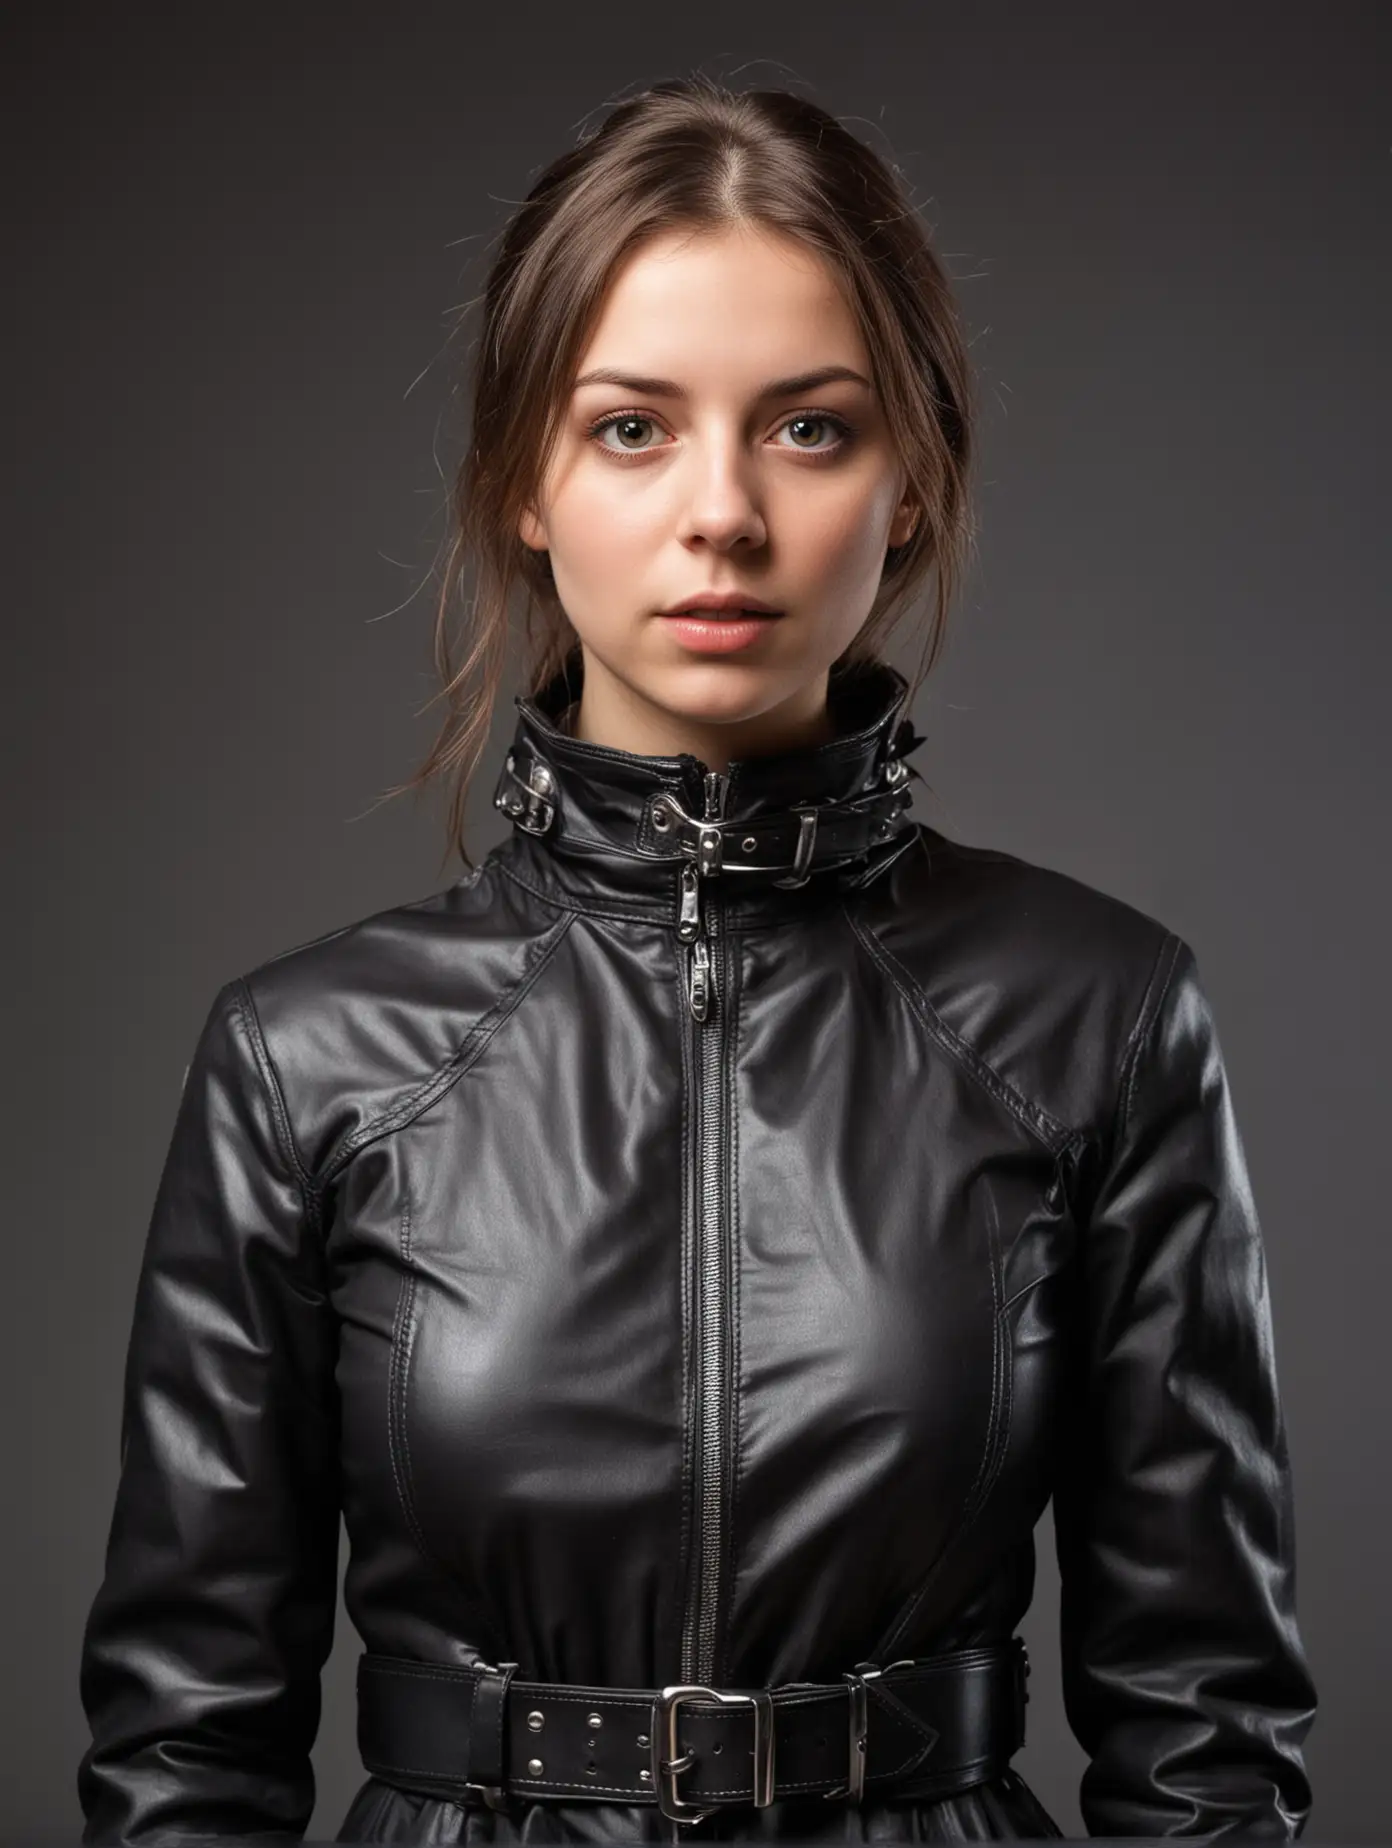 Young Woman Wearing Leather Straitjacket in Moody Interior